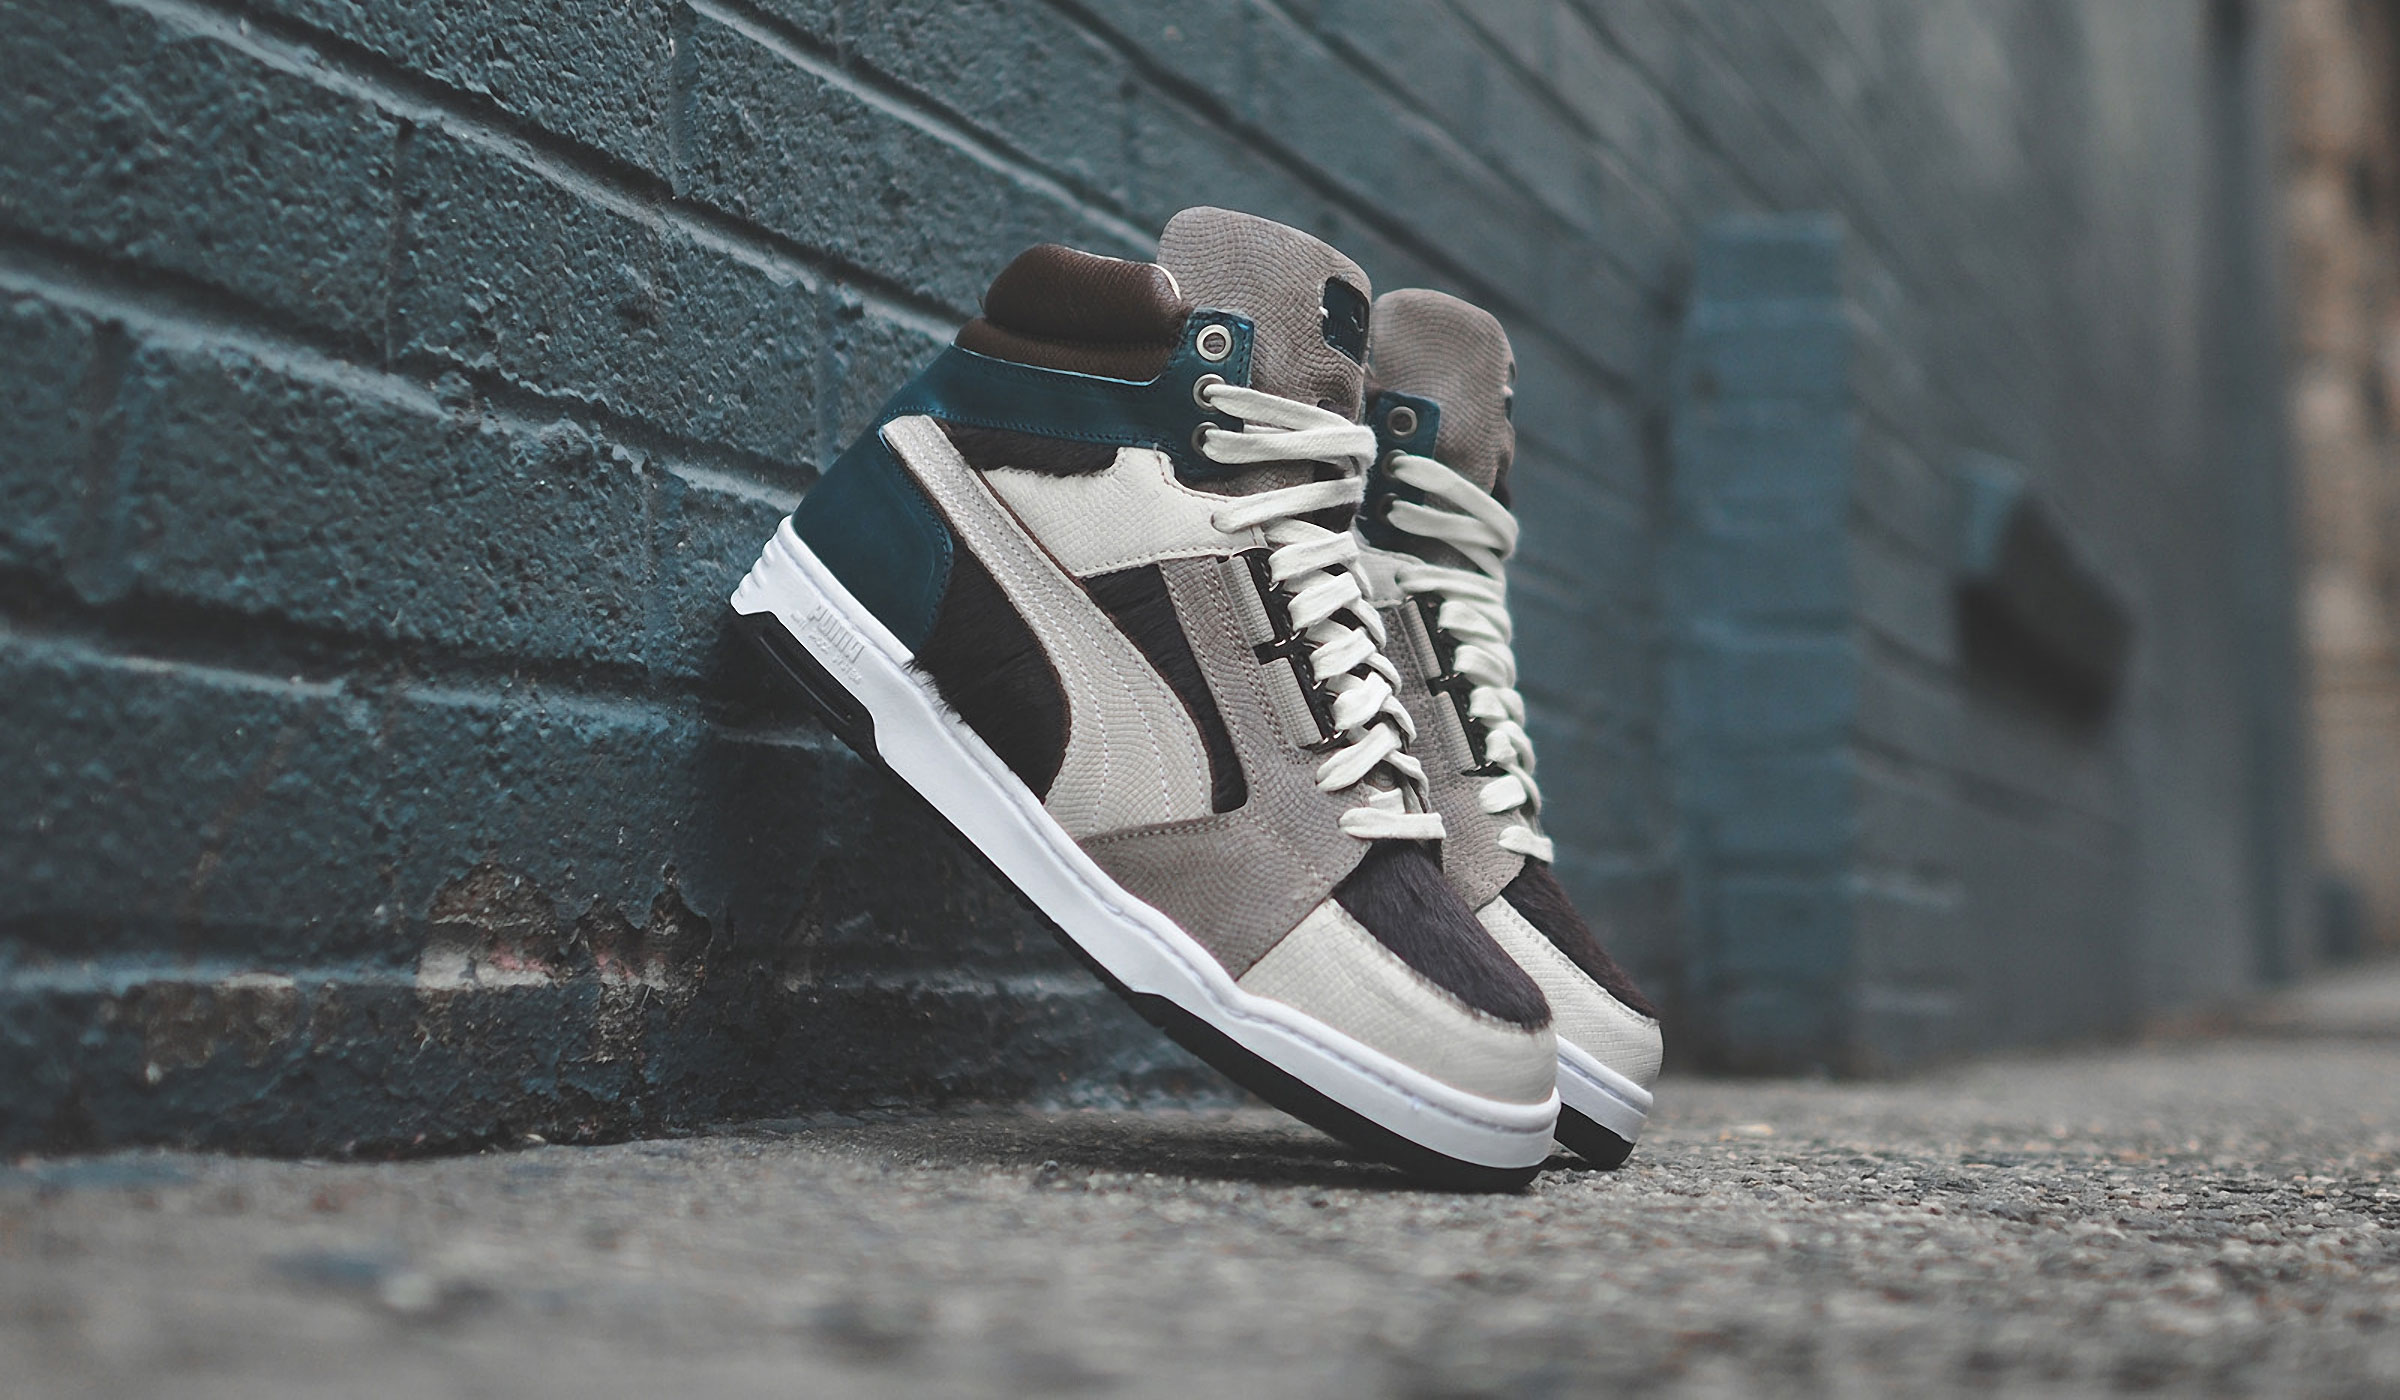 PUMA SLIPSTREAM "MADE IN ITALY" - BROWN, GREY & GREEN